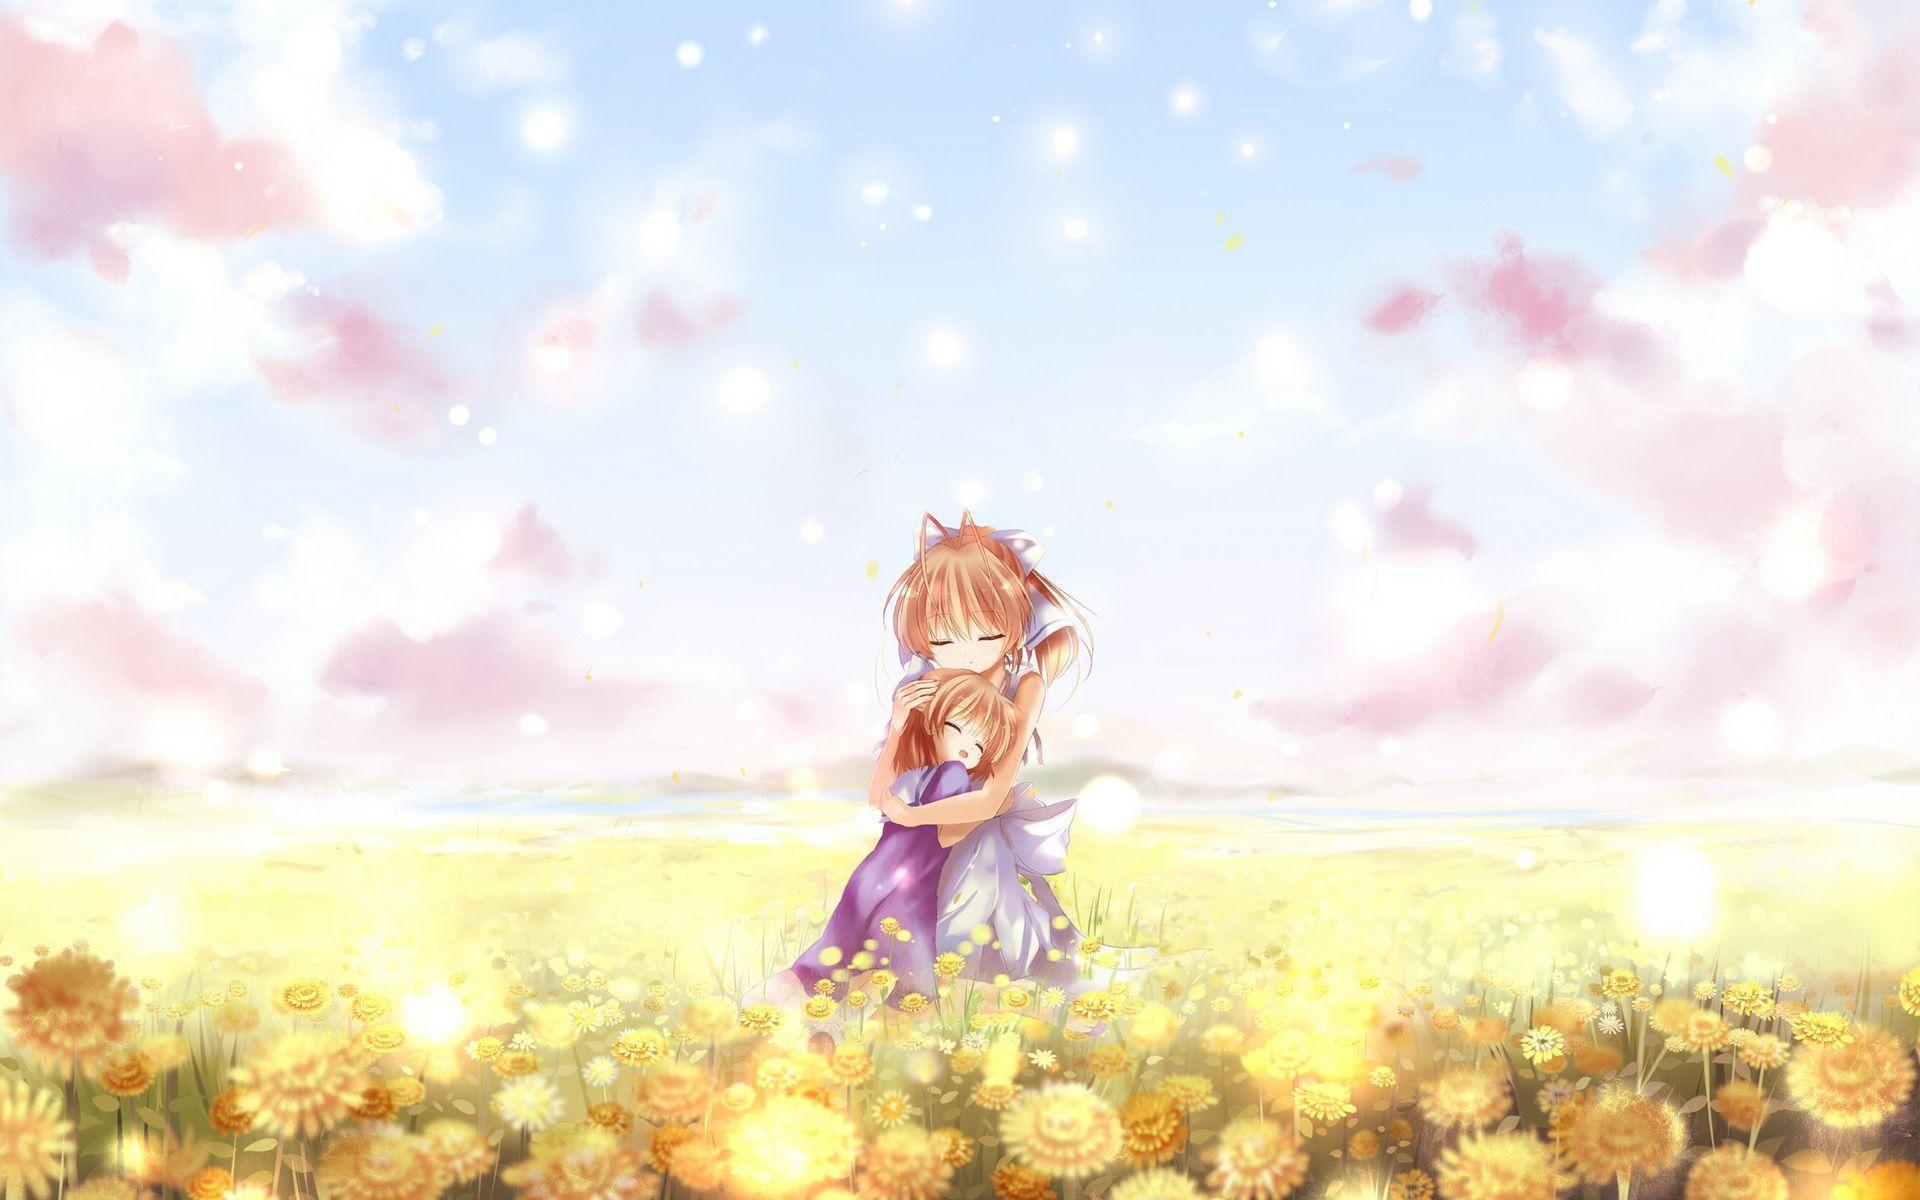 Clannad After Story Pc Wallpaper, Clannad After Story, Anime